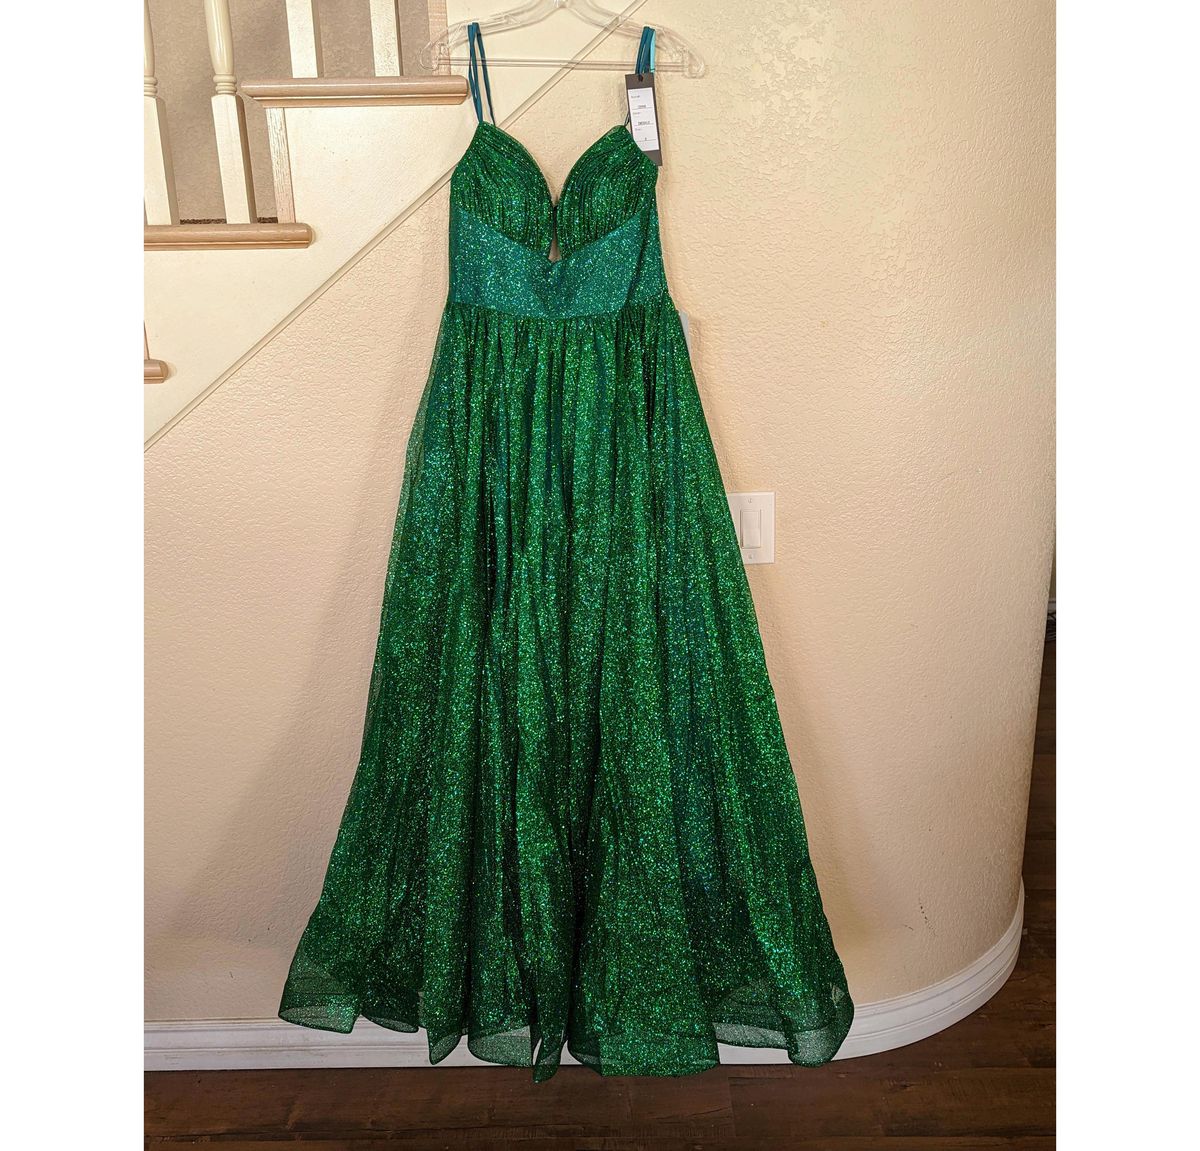 Style Emerald Green Formal Sweetheart Neckline Glitter Metallic Prom Ball Gown Dress Size 14 Prom Plunge Sheer Emerald Green Ball Gown on Queenly